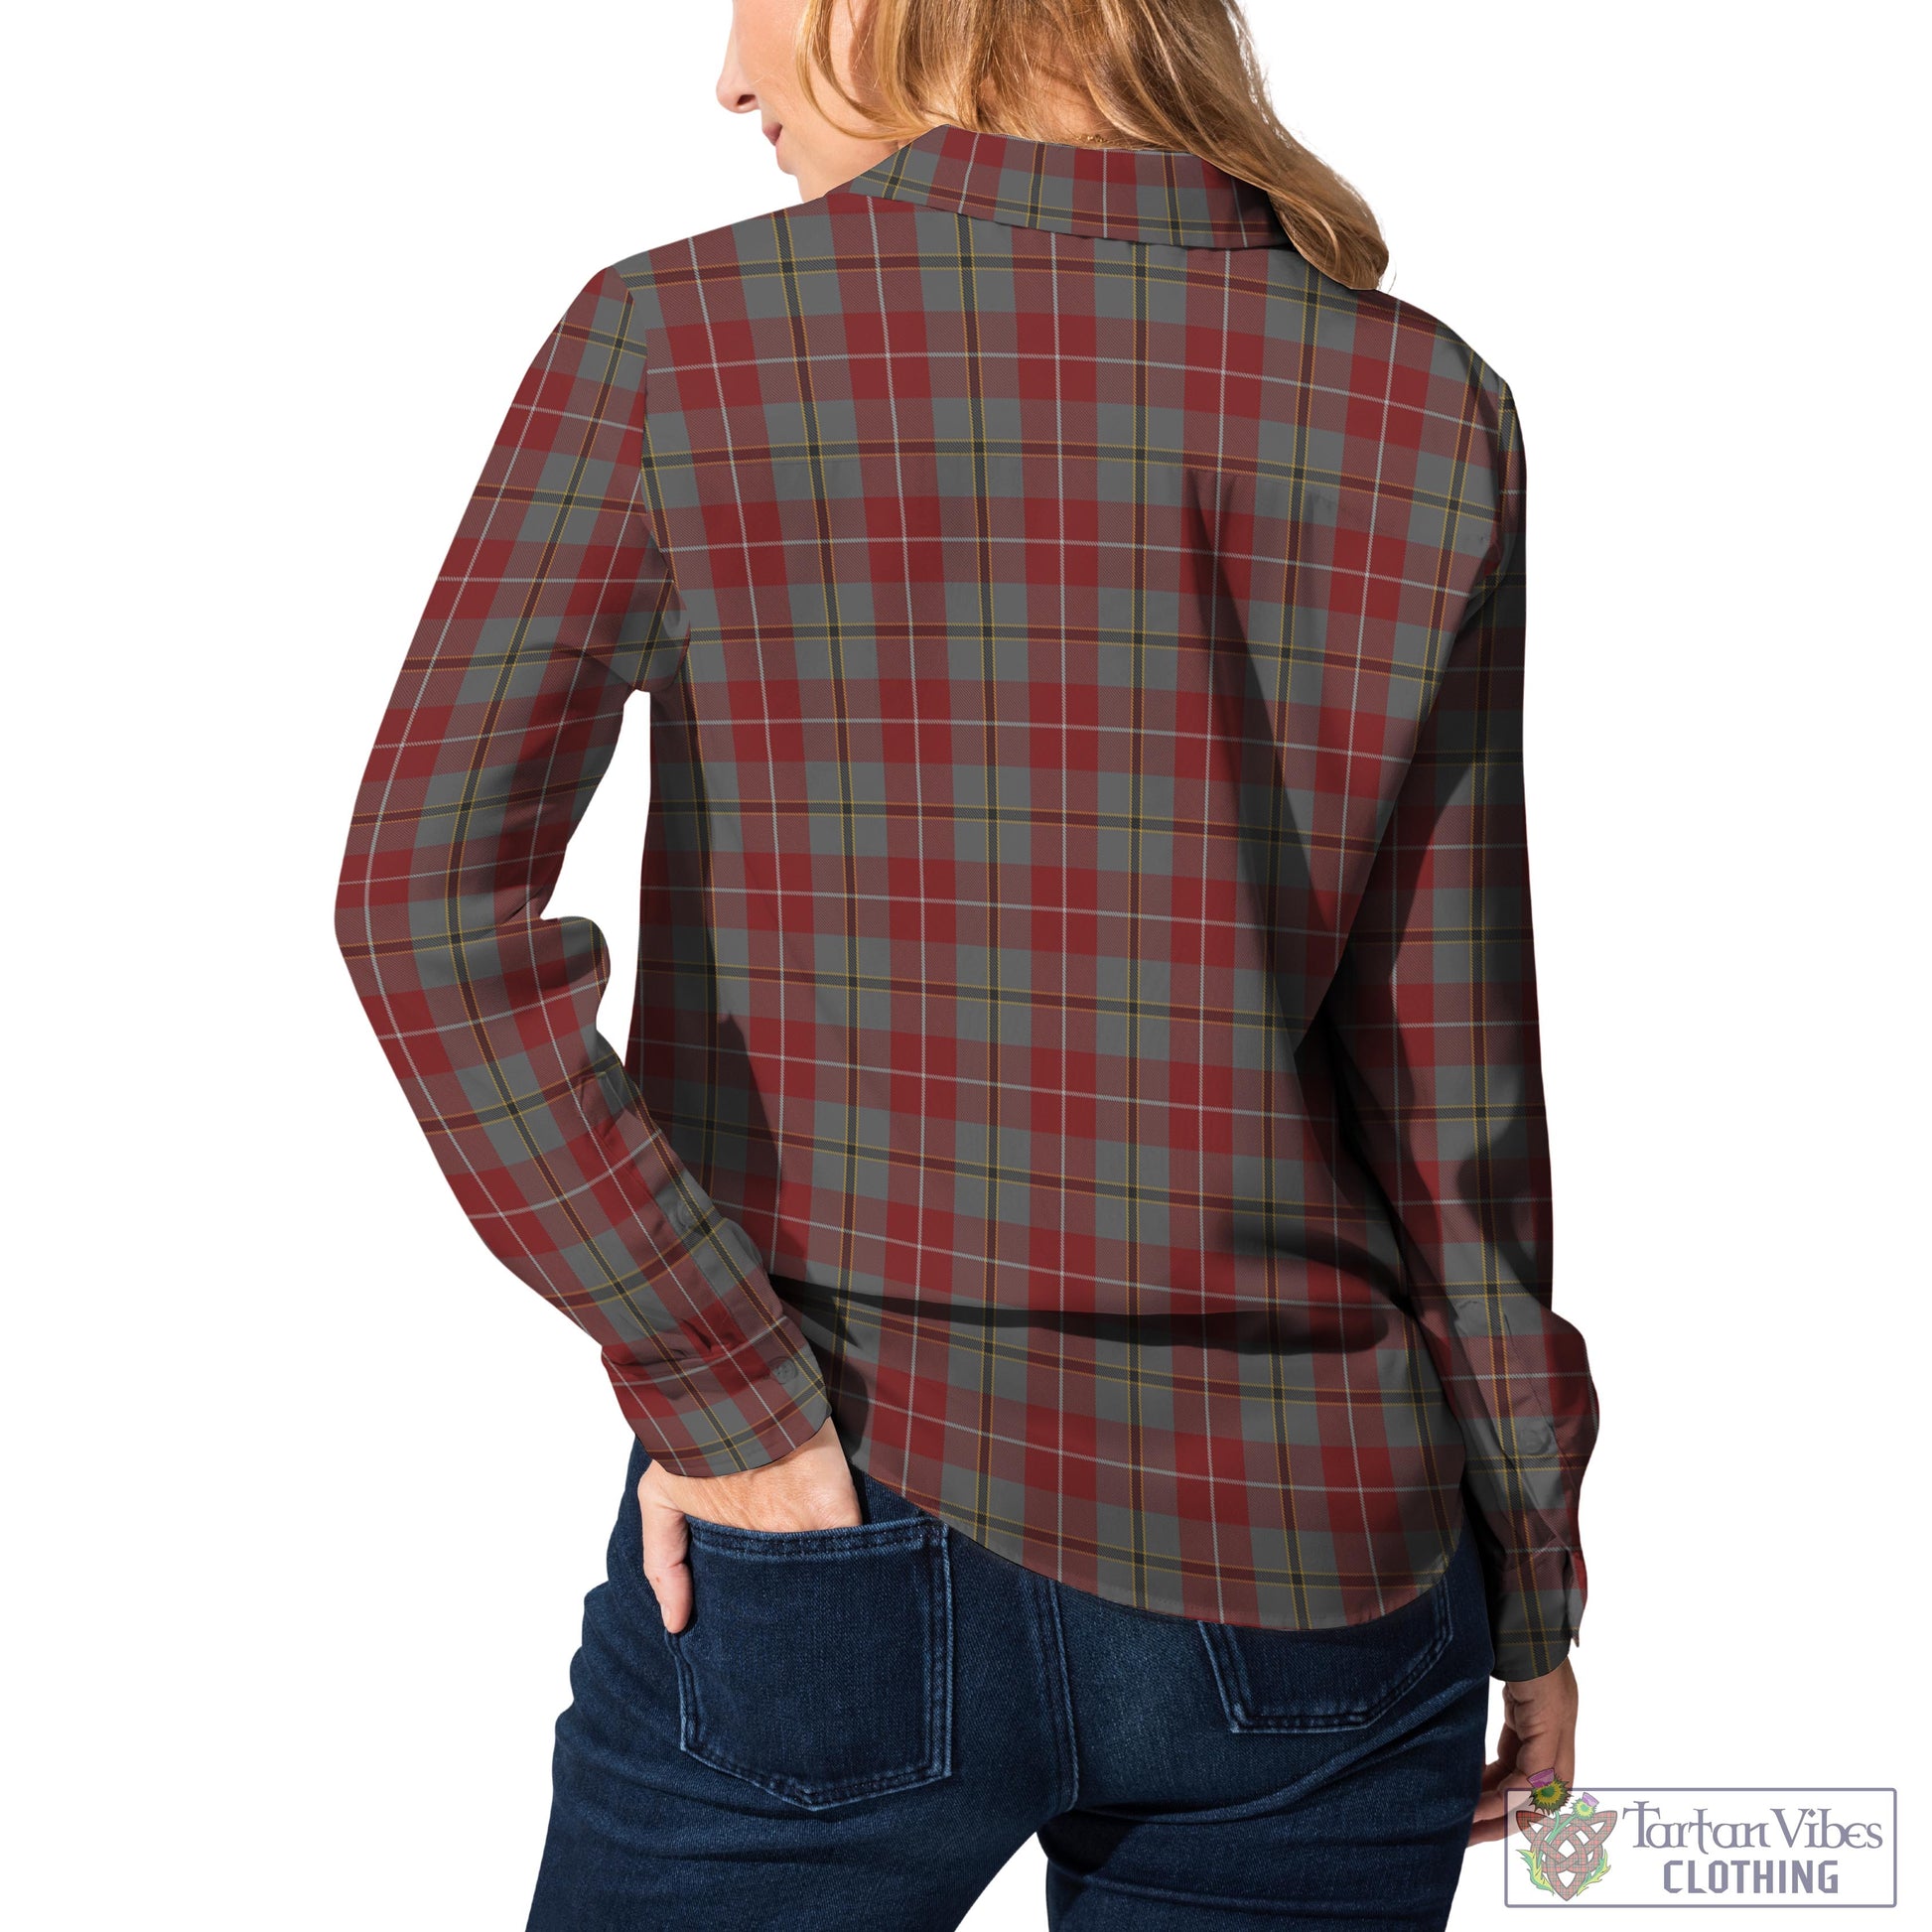 Tartan Vibes Clothing Douglas Ancient Red Tartan Womens Casual Shirt with Family Crest